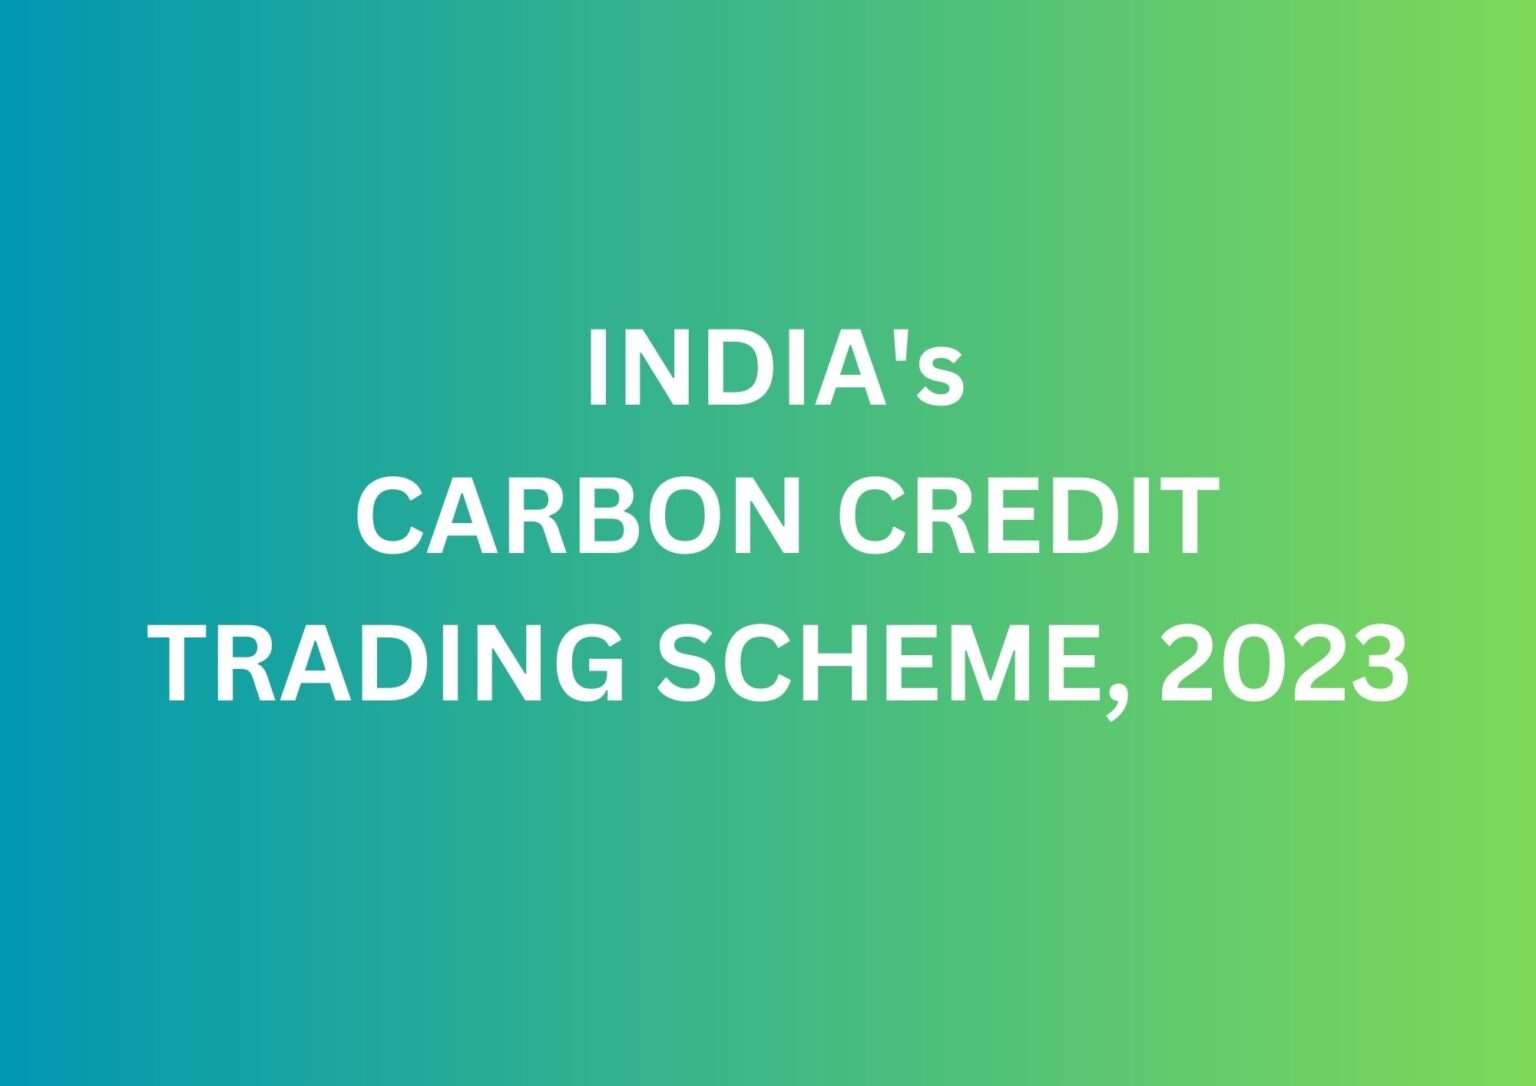 carbon-credit-trading-scheme-2023-of-india-r-v-k-s-and-associates